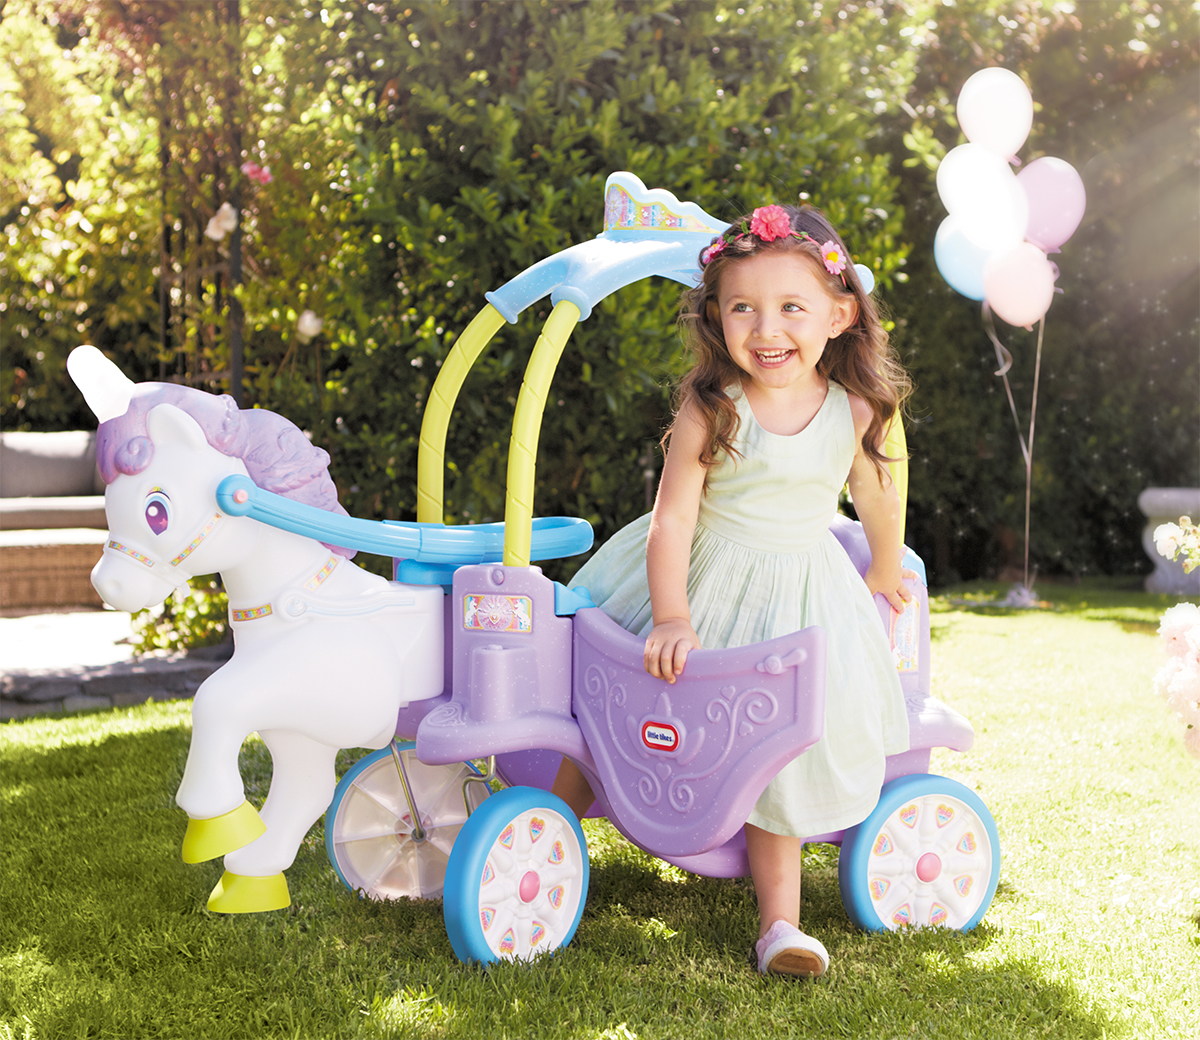 little tikes unicorn horse and carriage